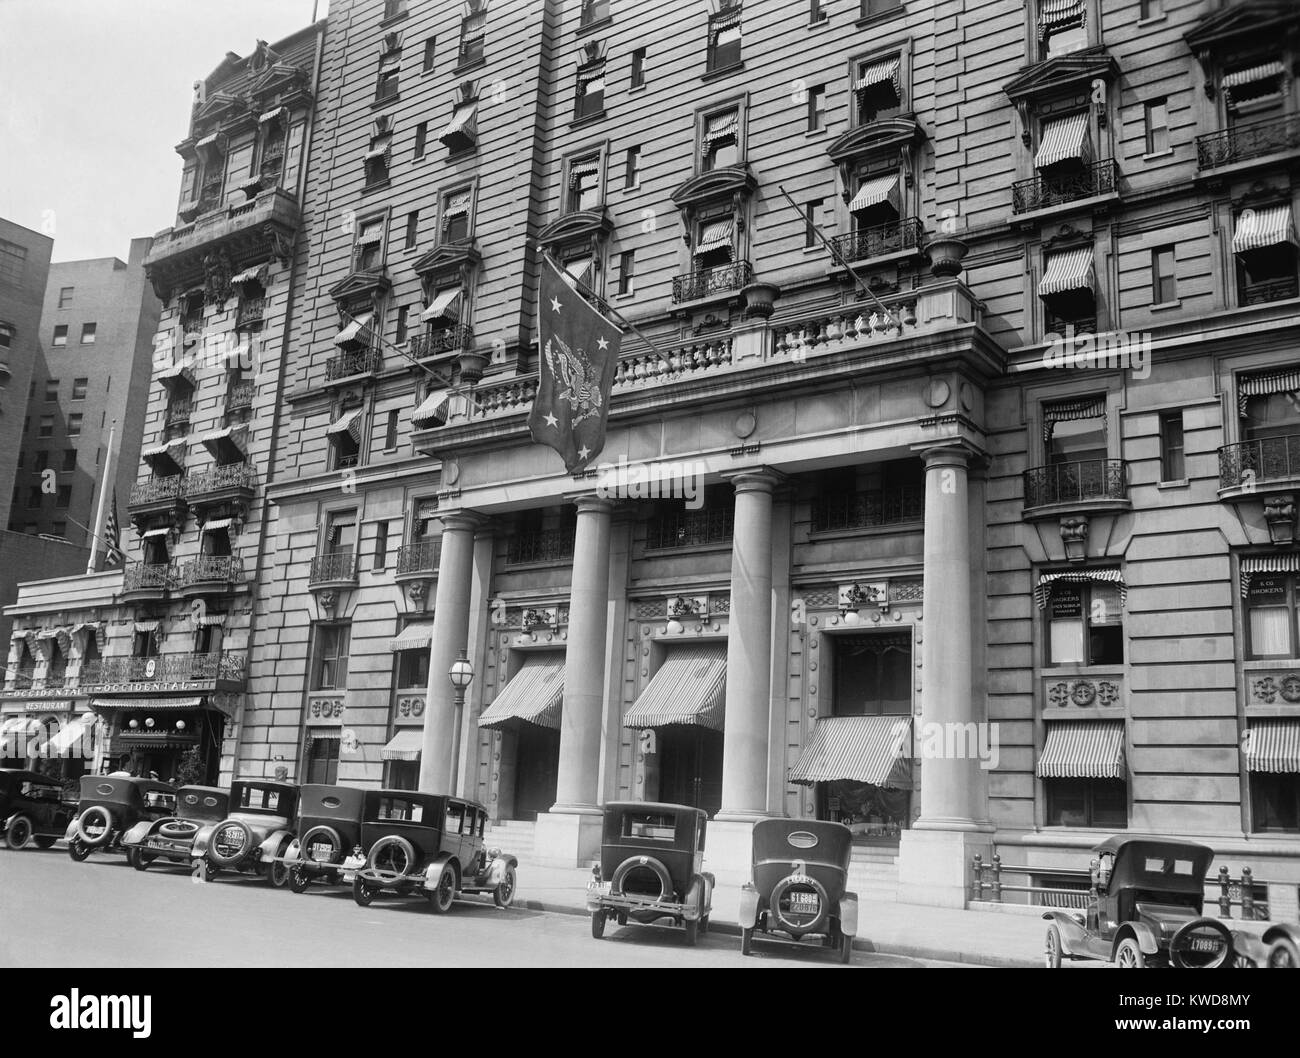 President's flag hanging above the entrance to Washington, D.C.'s Willard Hotel, Aug. 4, 1923. Vice President Coolidge's family lived at the Hotel and it became the residence of the U.S. President when Warren Harding died on Aug. 2, 1923. (BSLOC_2015_16_16) Stock Photo